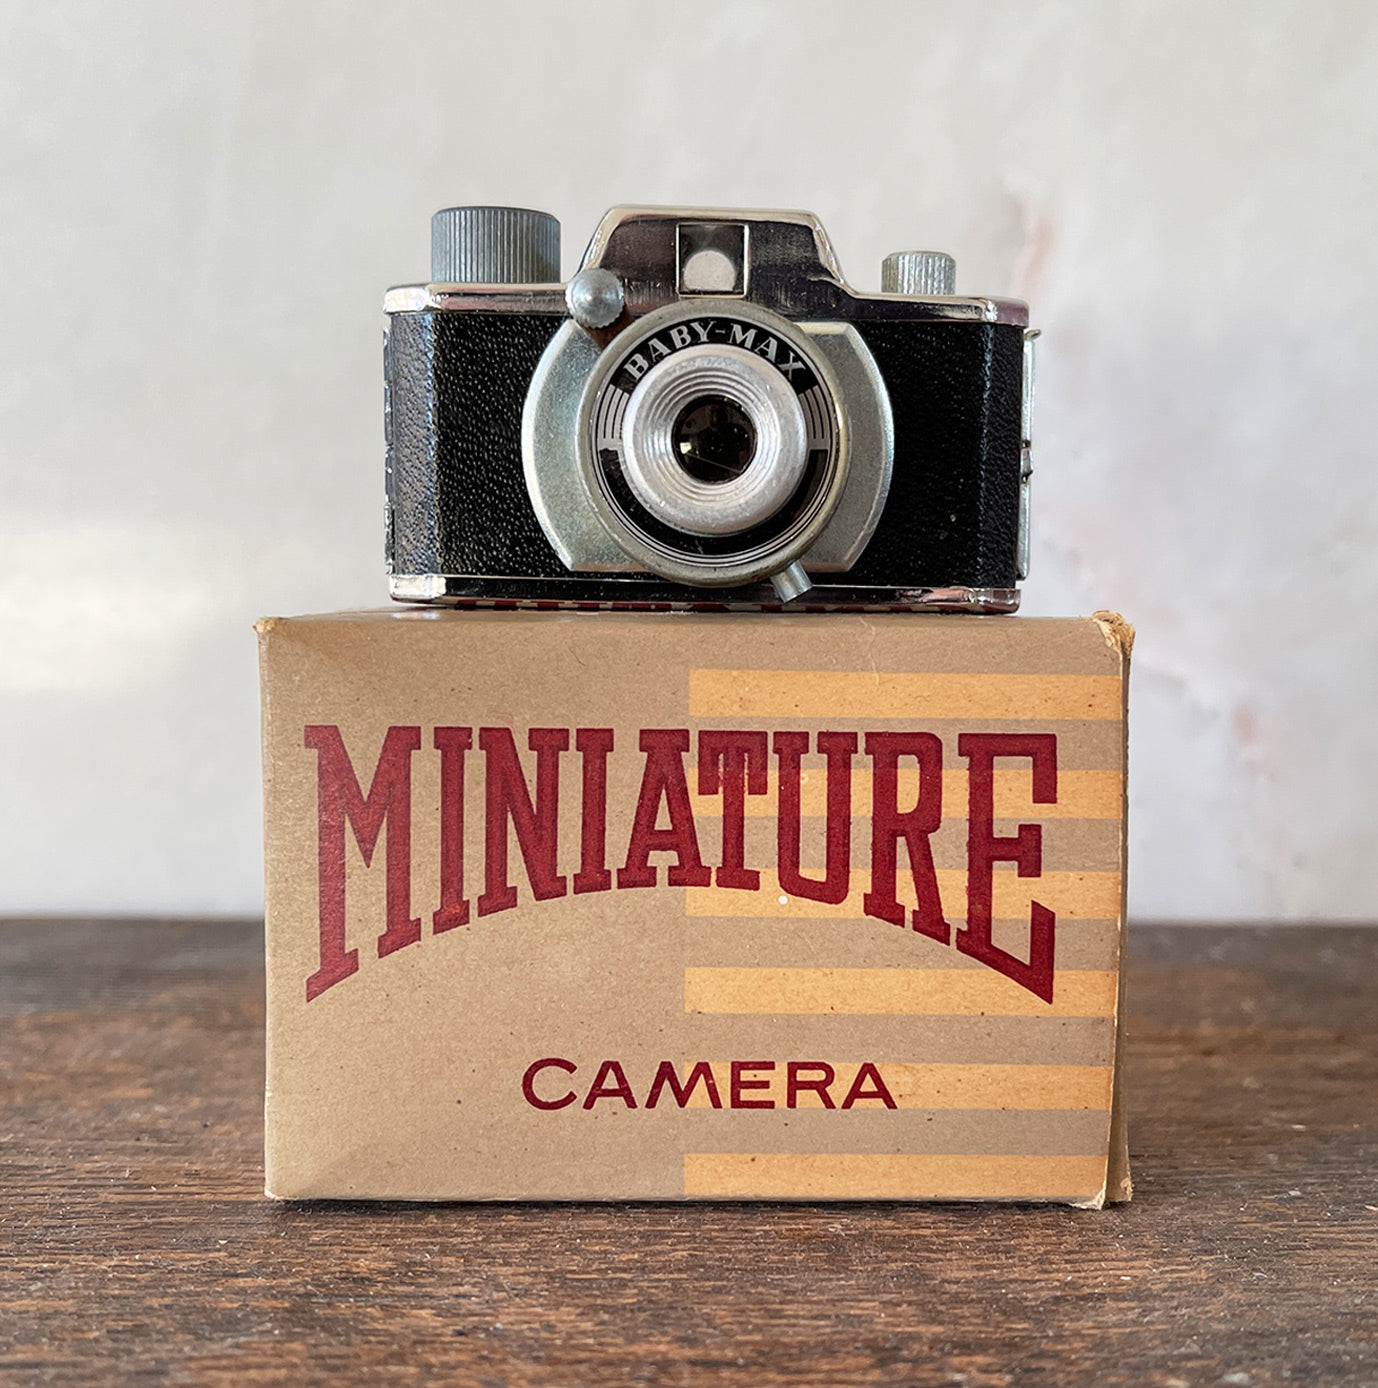 A rare Tougodo Baby Max Miniature 17.5mm Camera in its original box with instruction sheet. The Baby Max is a Japanese sub-miniature camera that takes ten 14x14mm images on 17.5mm paper backed roll film - SHOP NOW - www.intovintage.co.uk